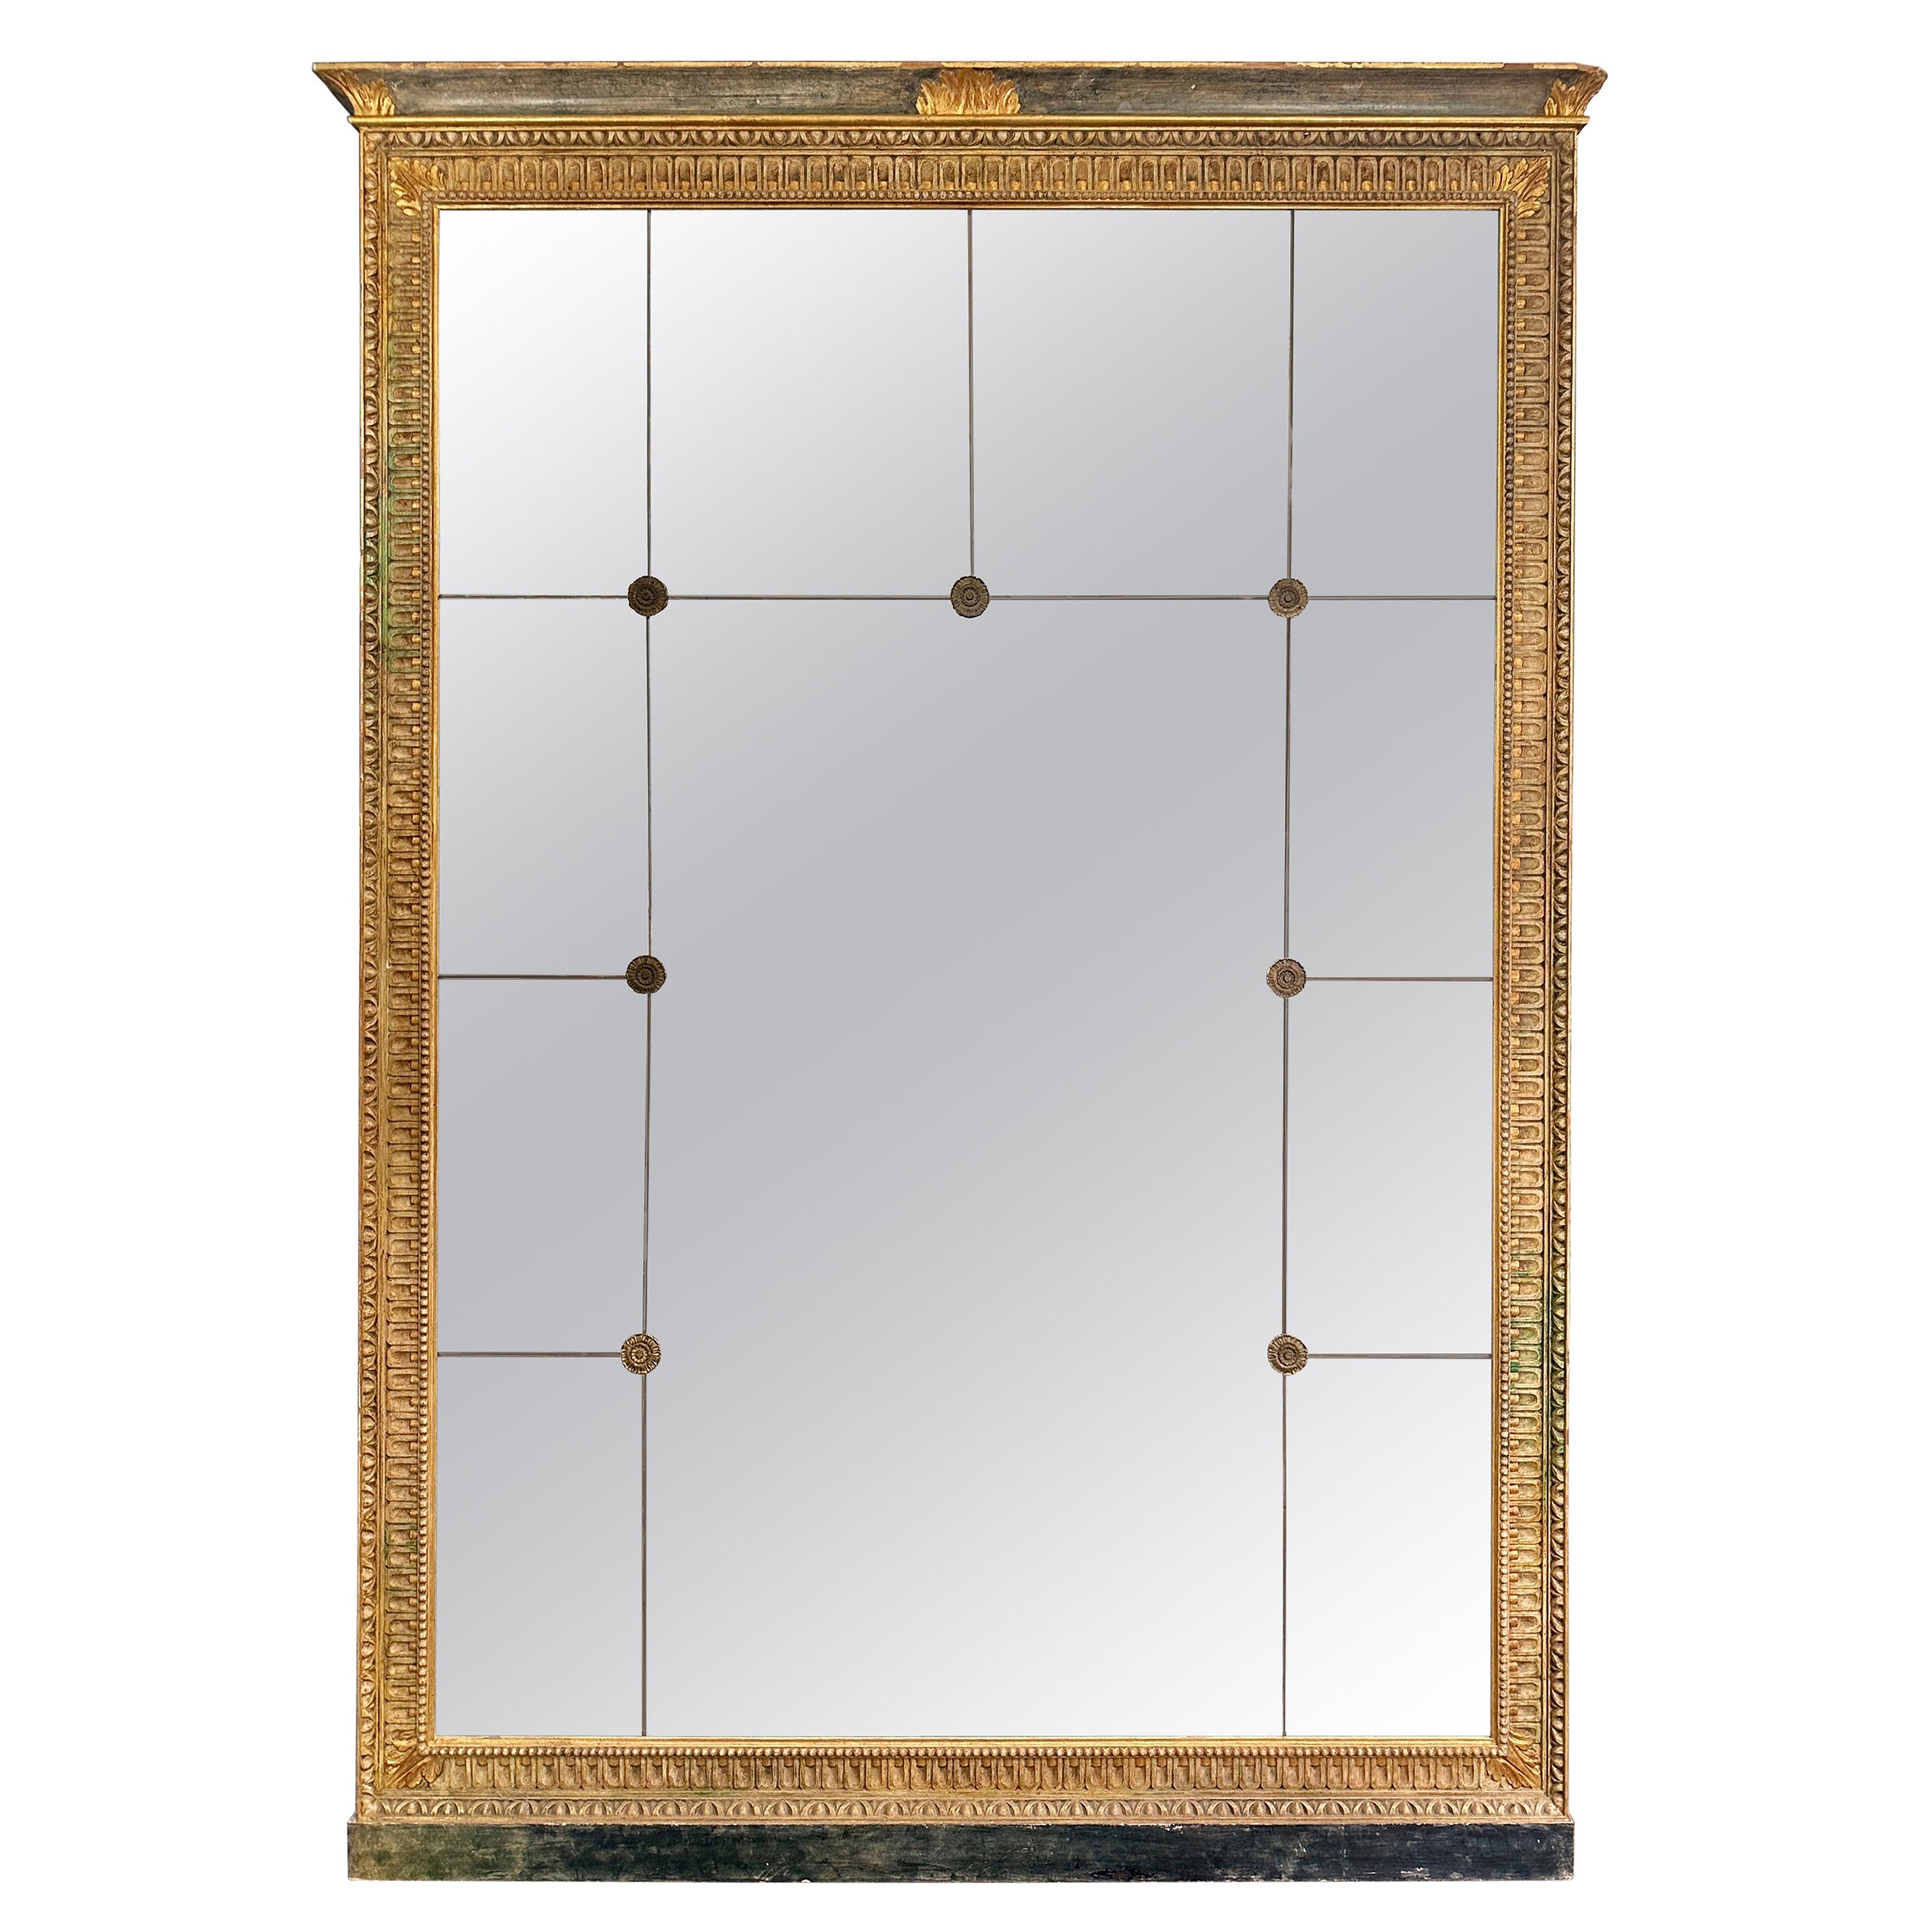 A large French Antique Panelled Gold Gilt Mirror In The Empire Style 